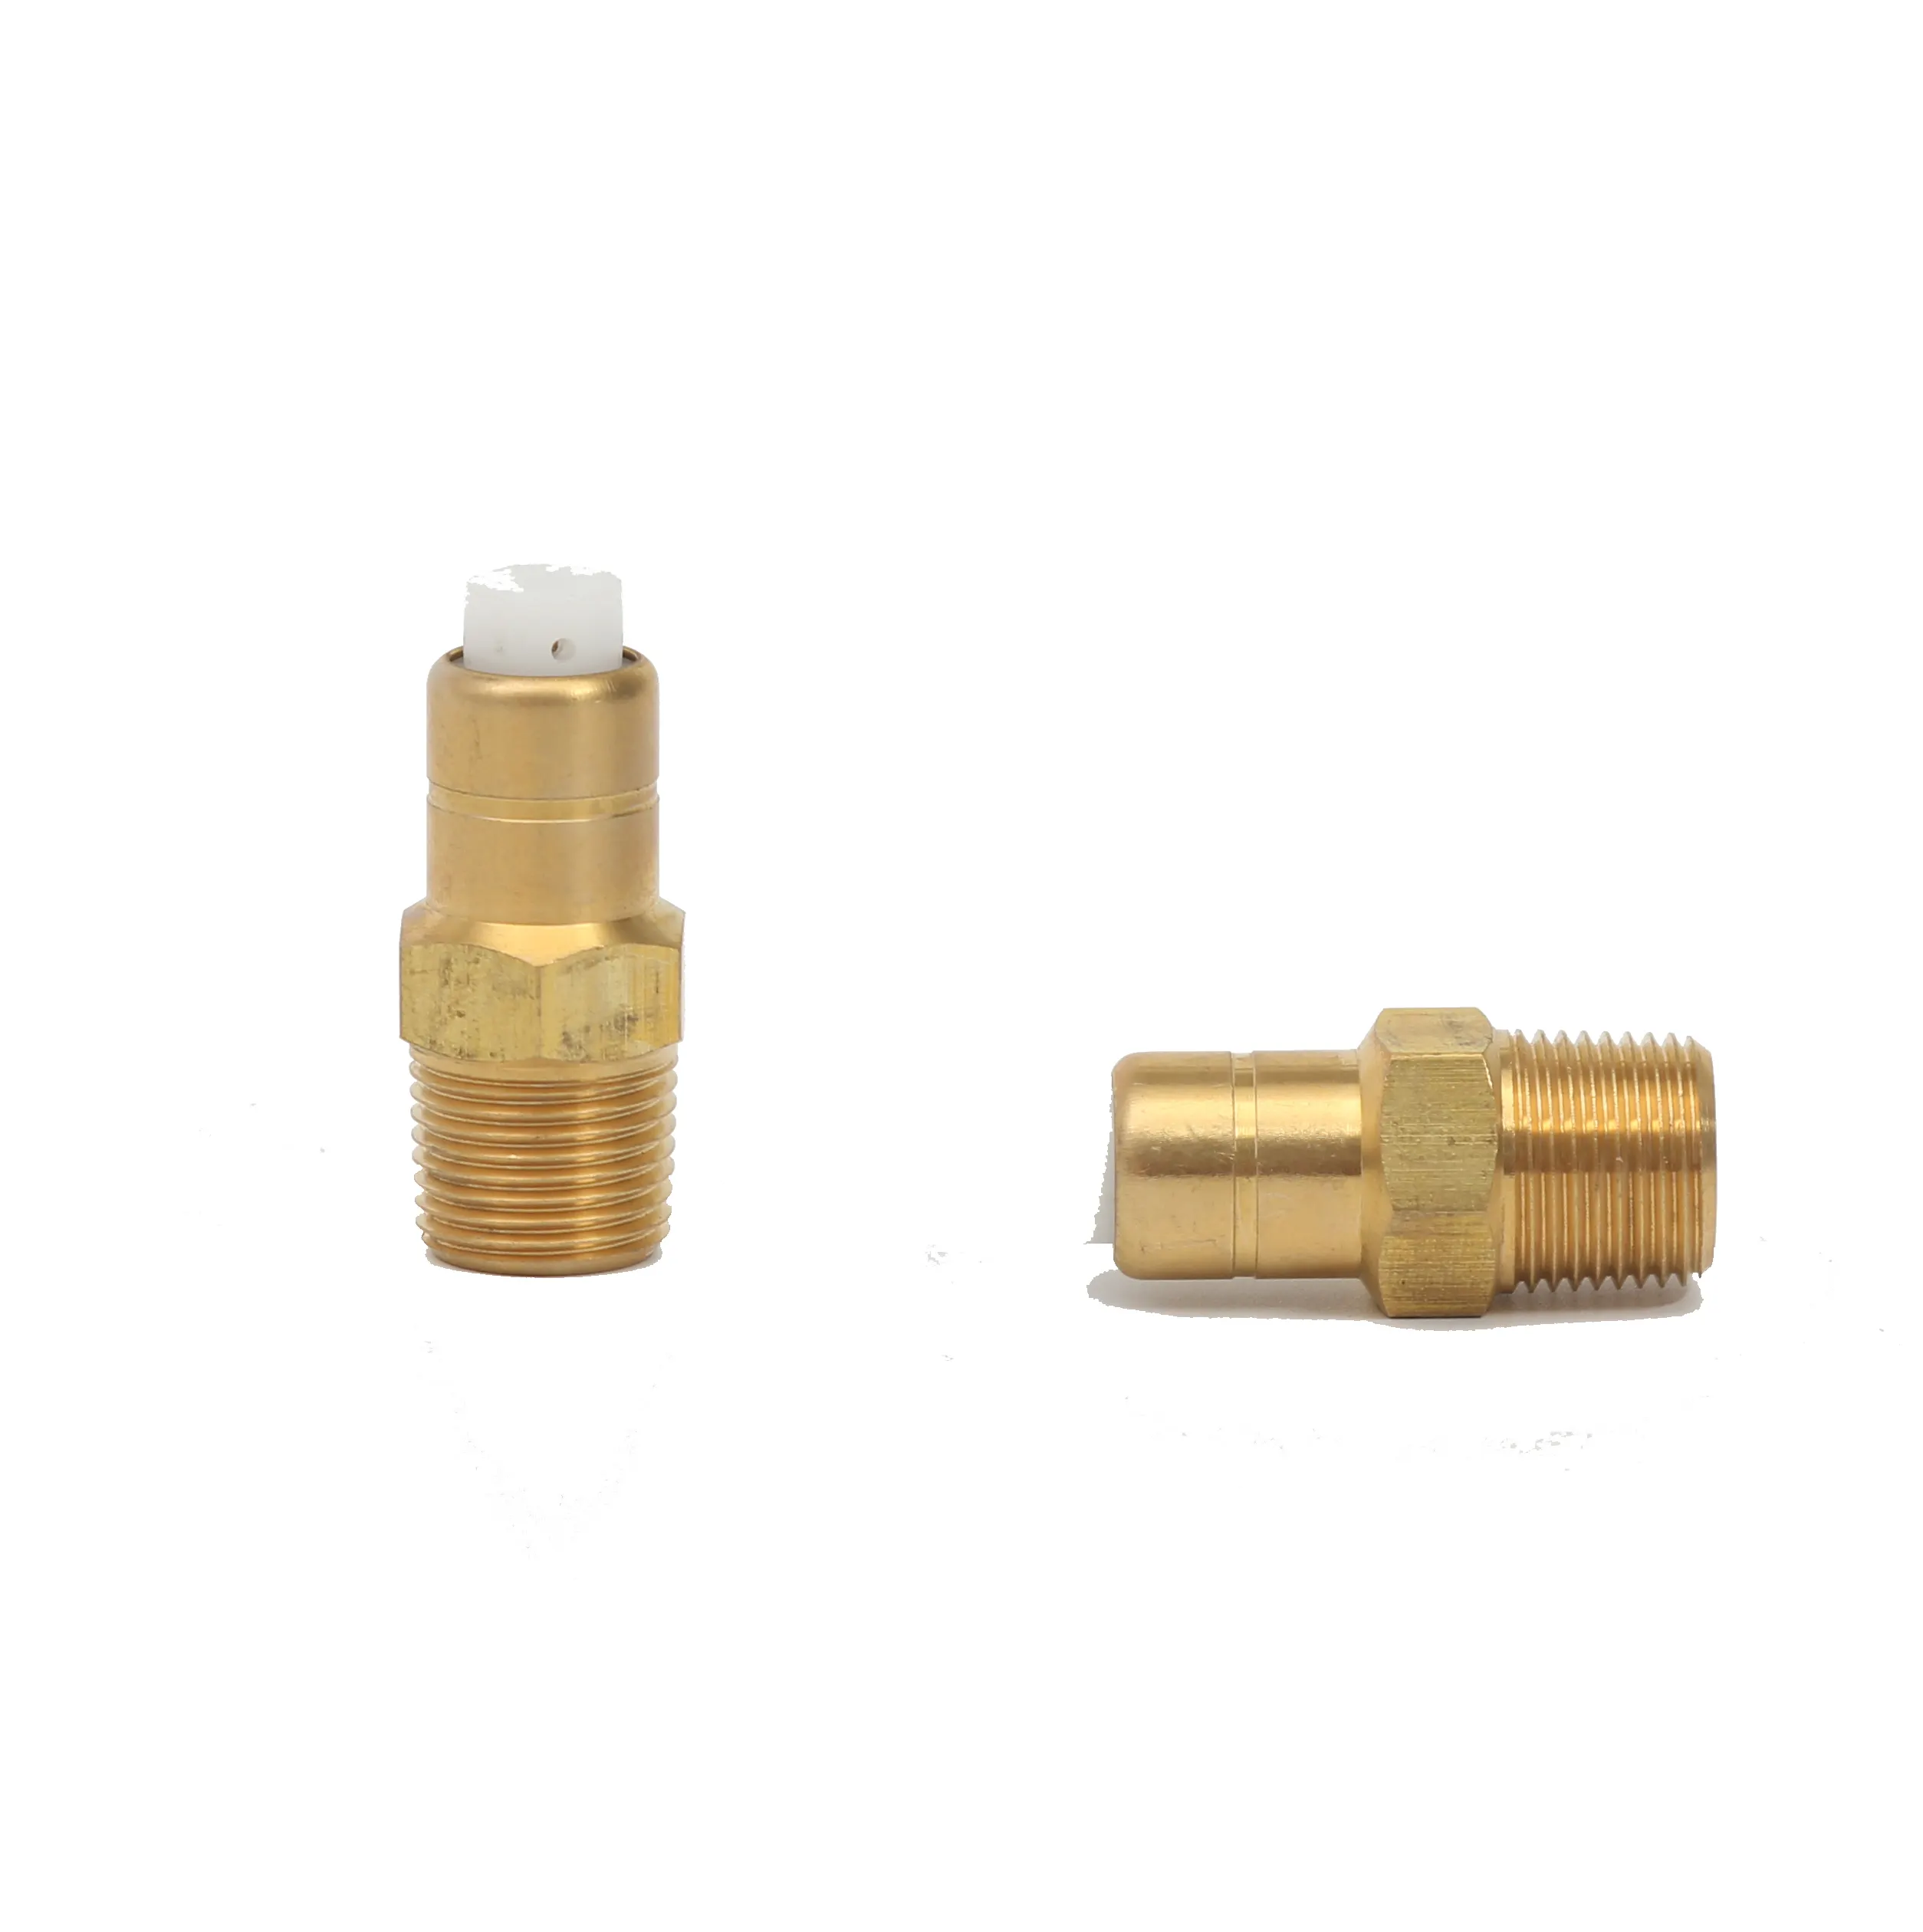 High Pressure Washer Parts Thermal Relief Valve 3/8 made in China